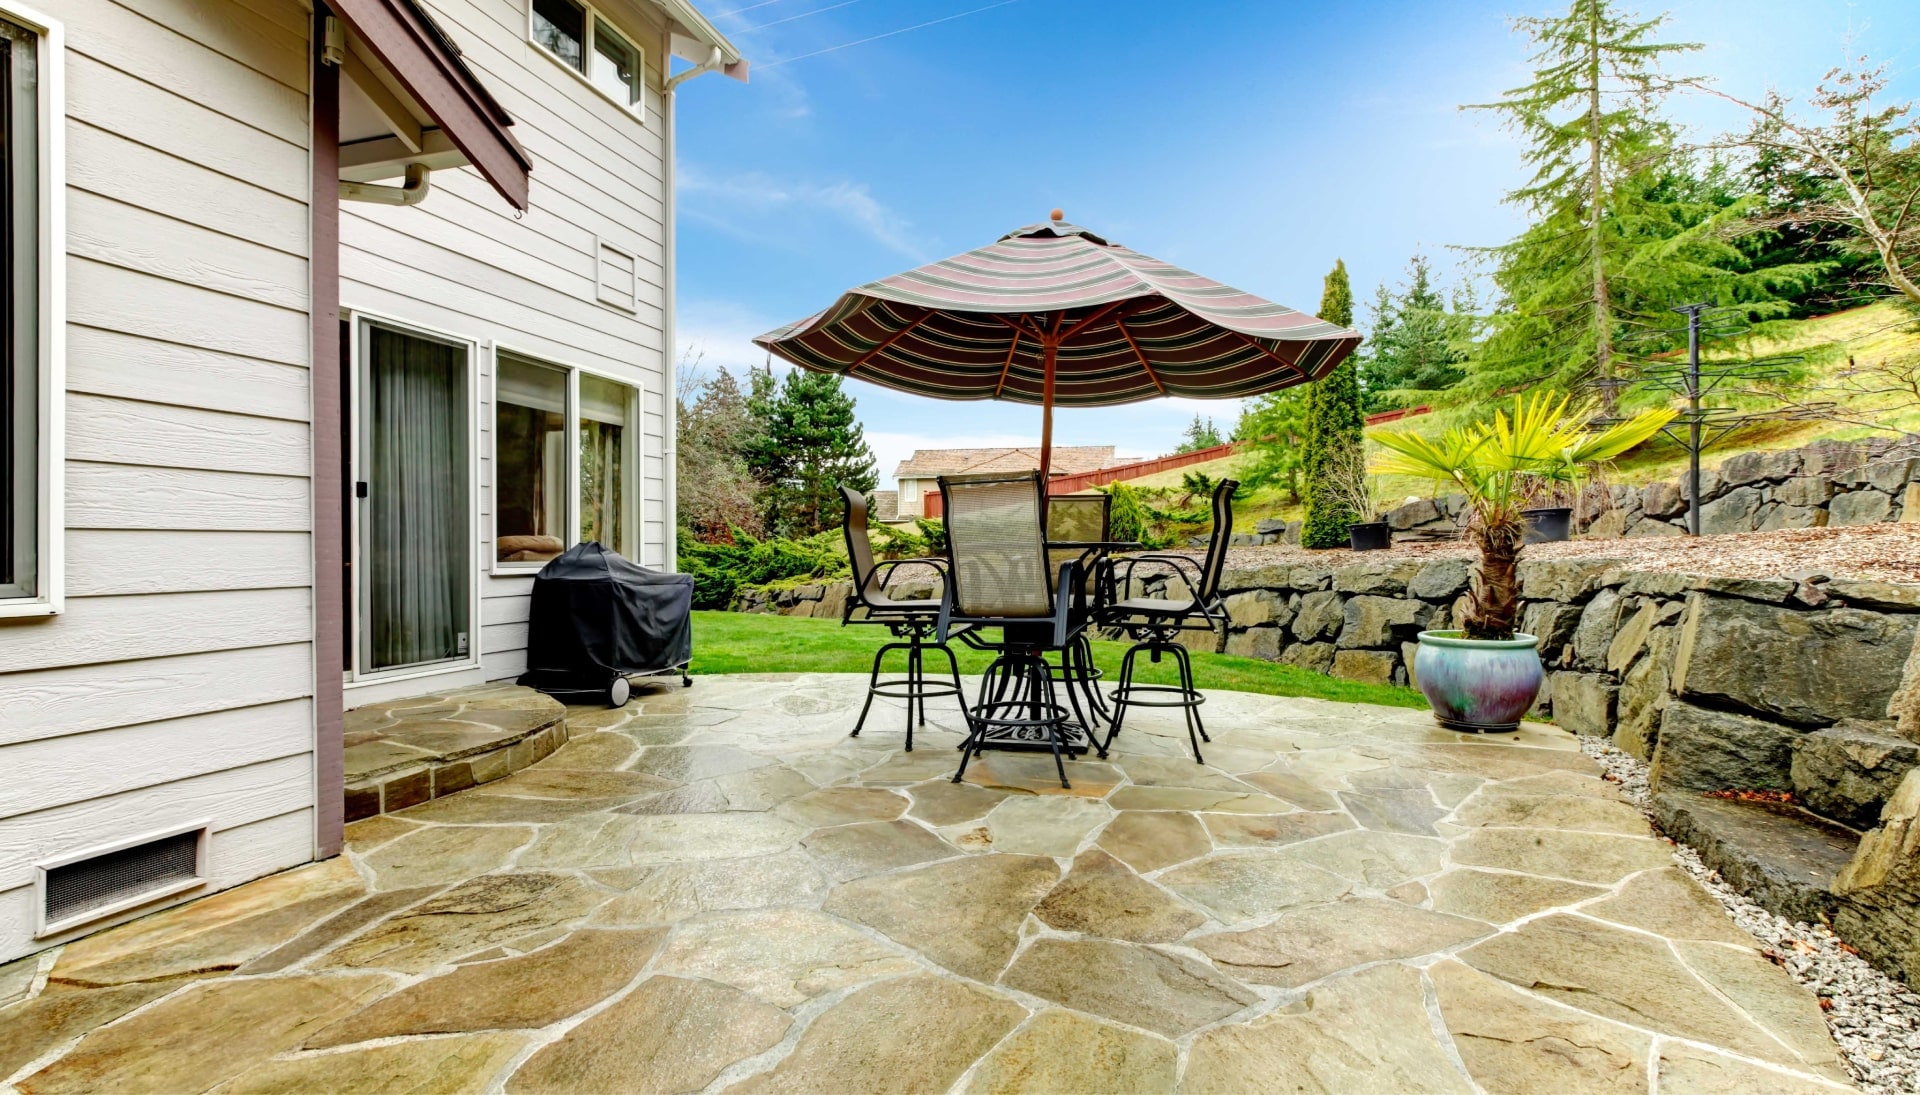 Beautifully Textured and Patterned Concrete Patios in Denver, Colorado area!